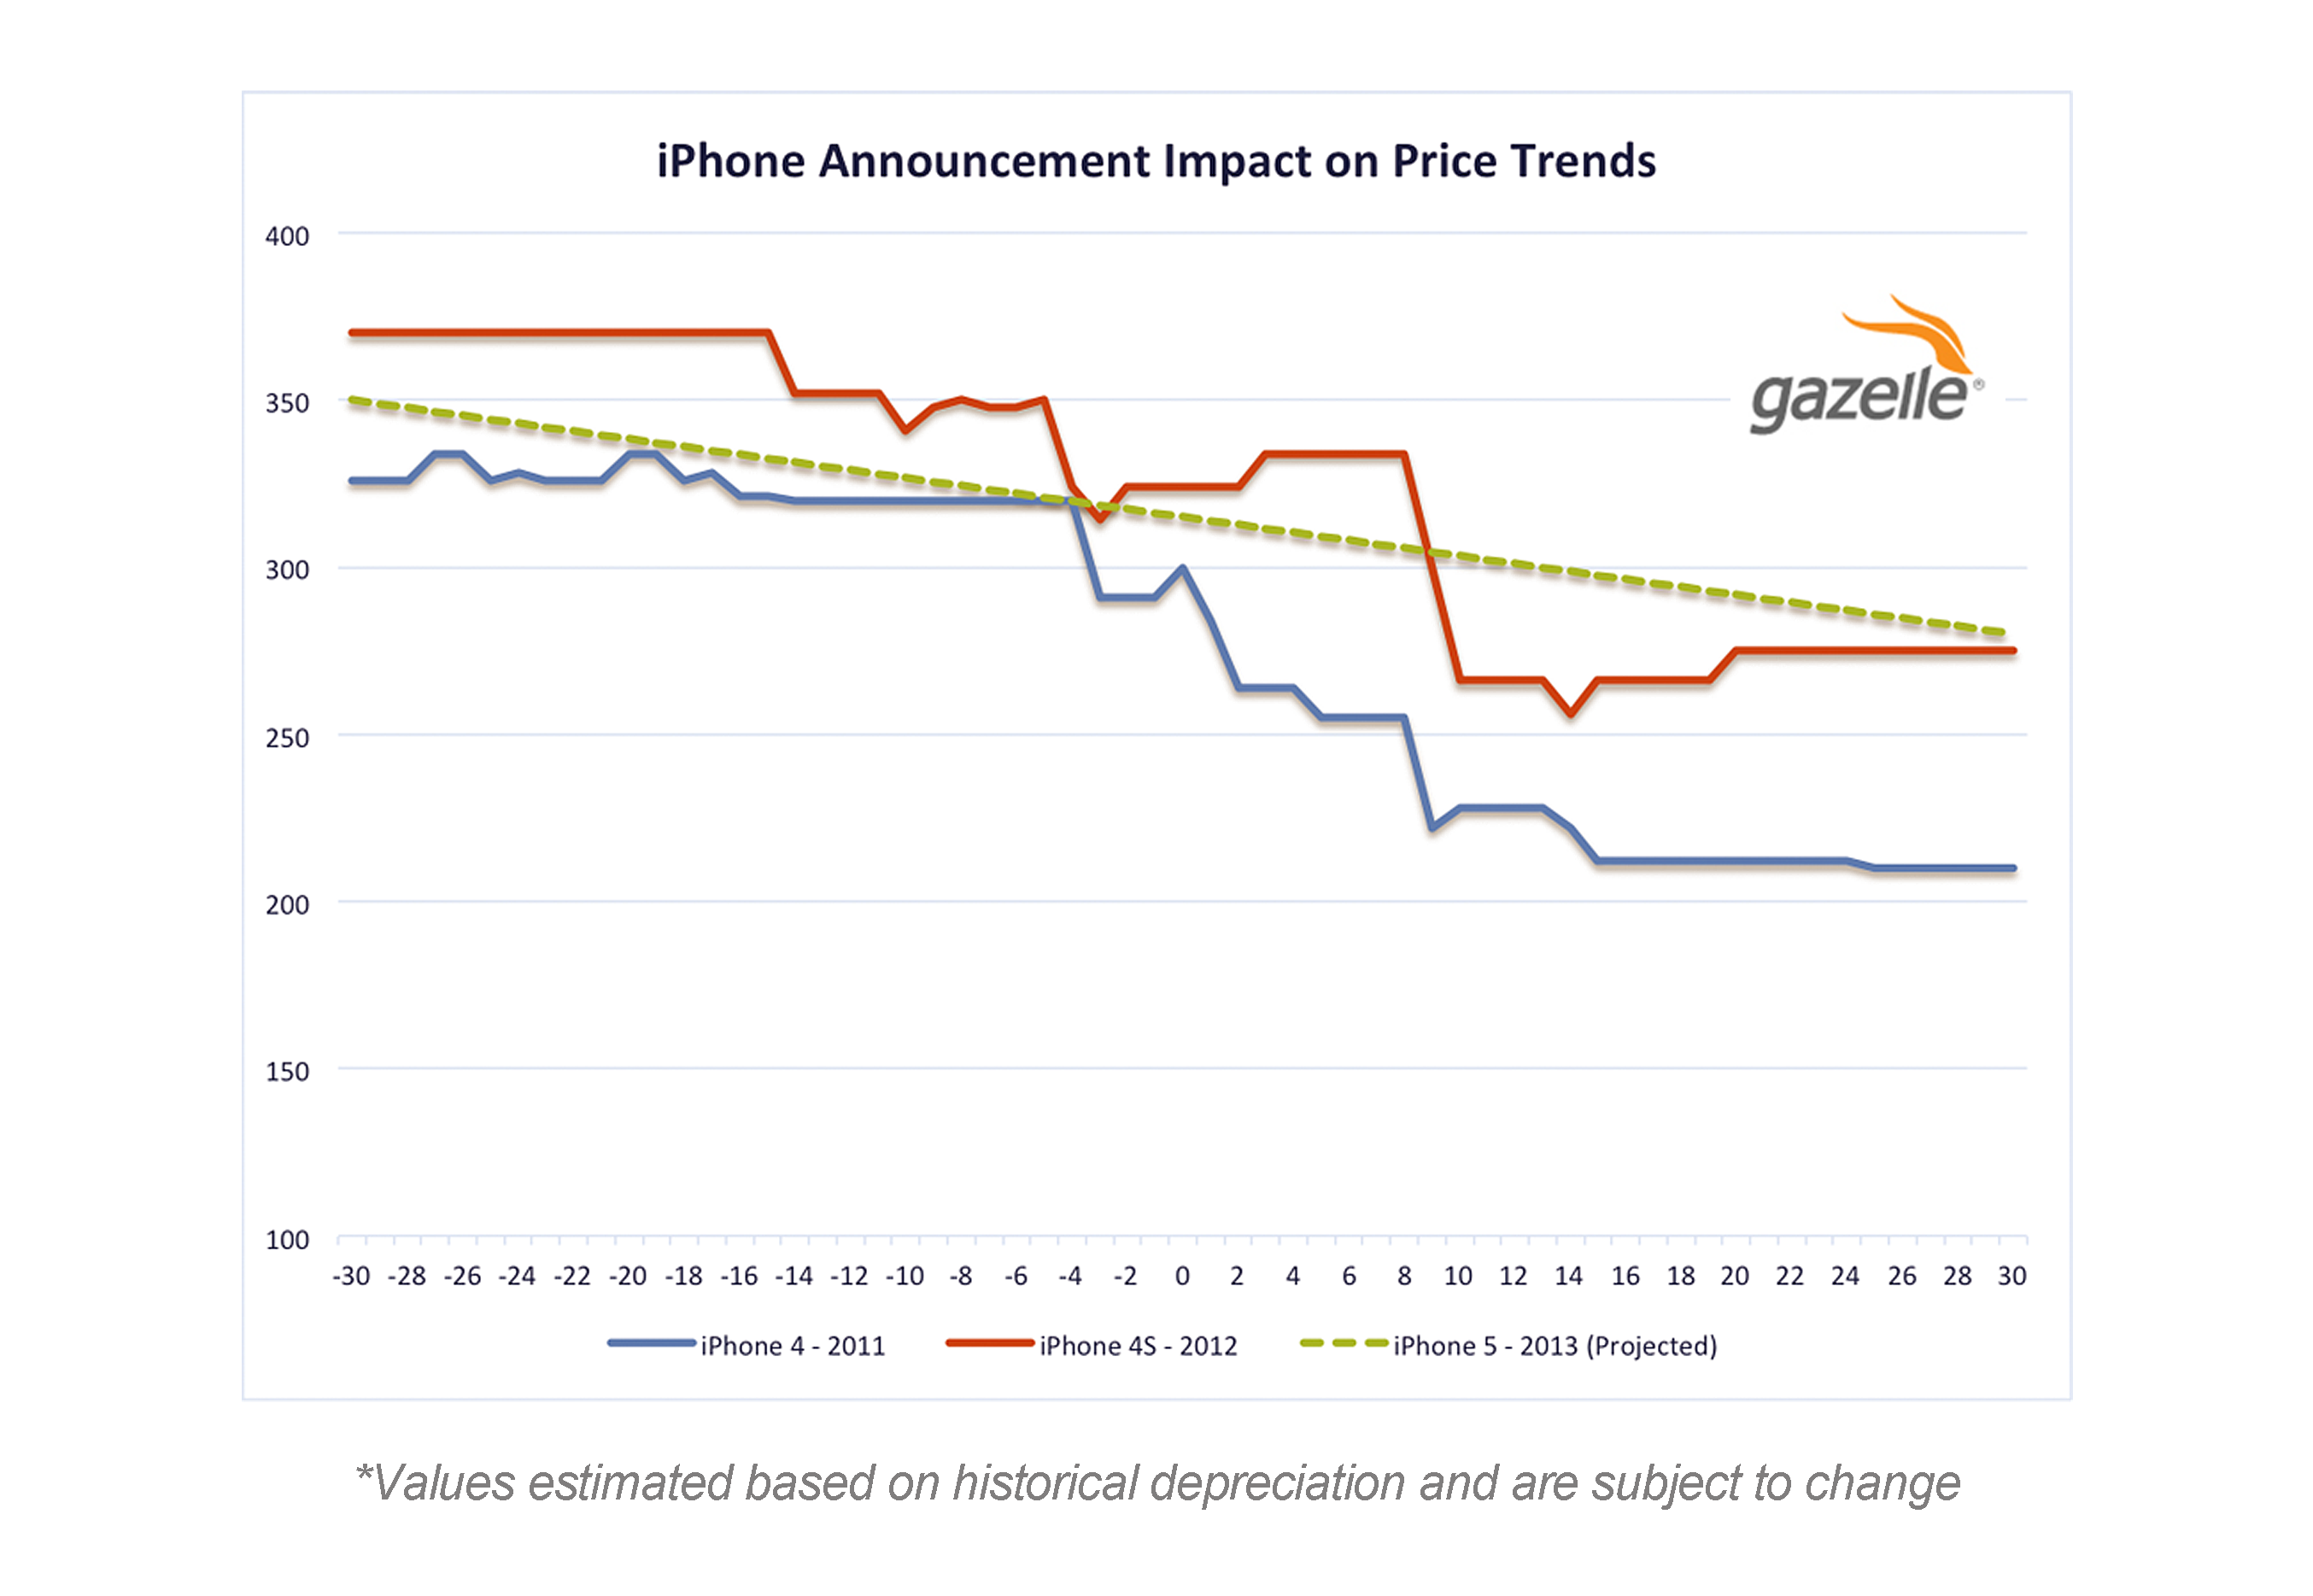 iPhone trade-in prices decline as we approach the iPhone announcement date.